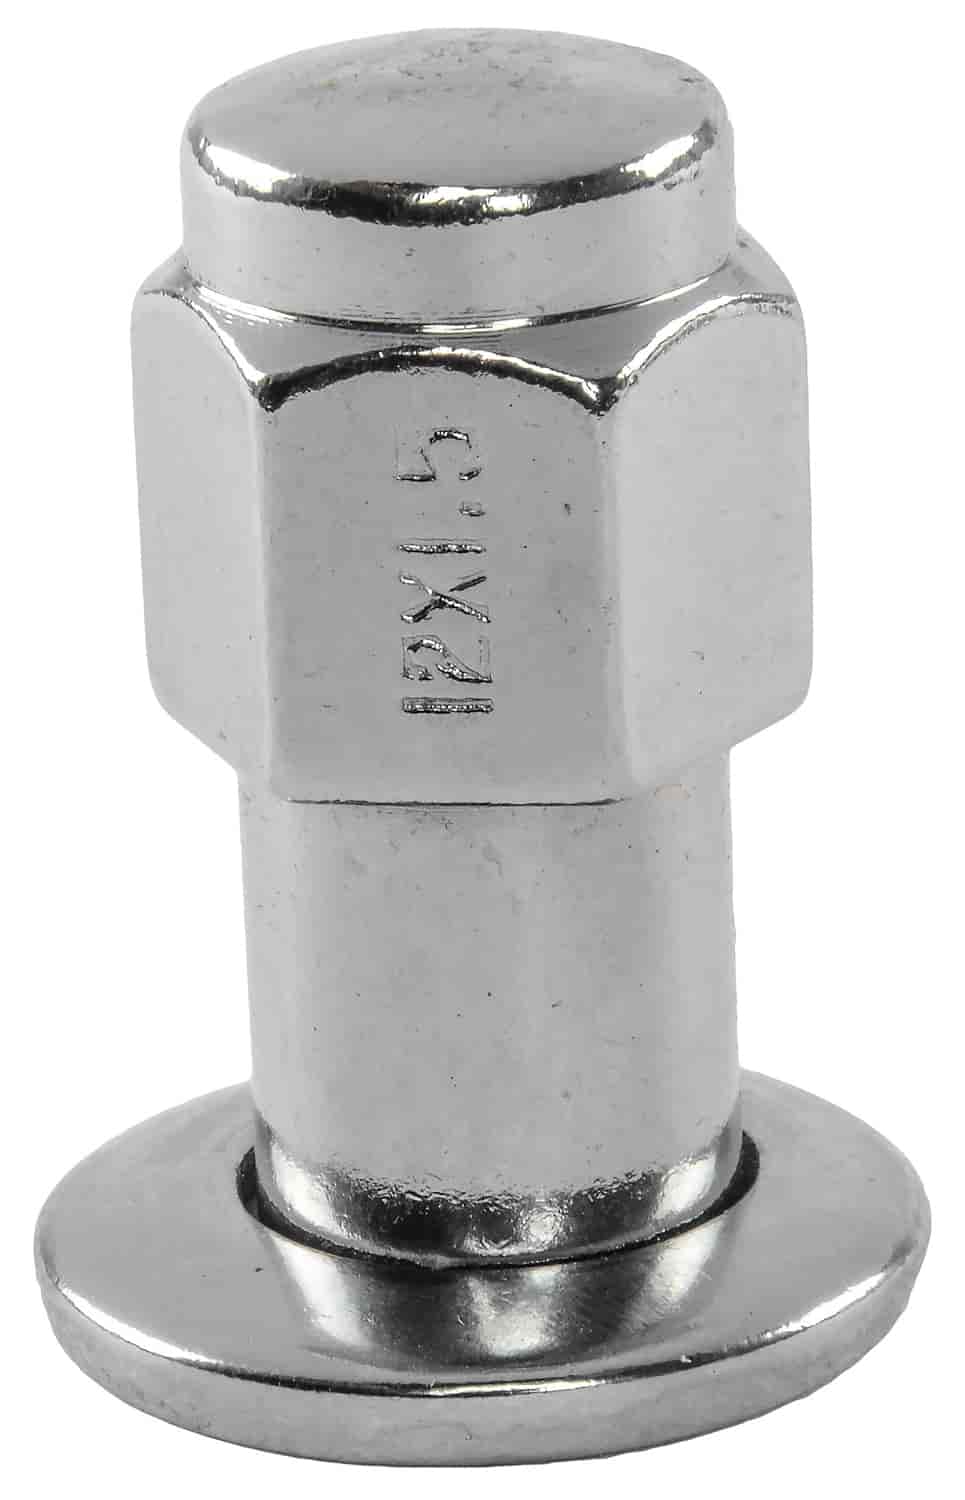 Standard Mag Lug Nuts, Closed-End with Off-Center Washers